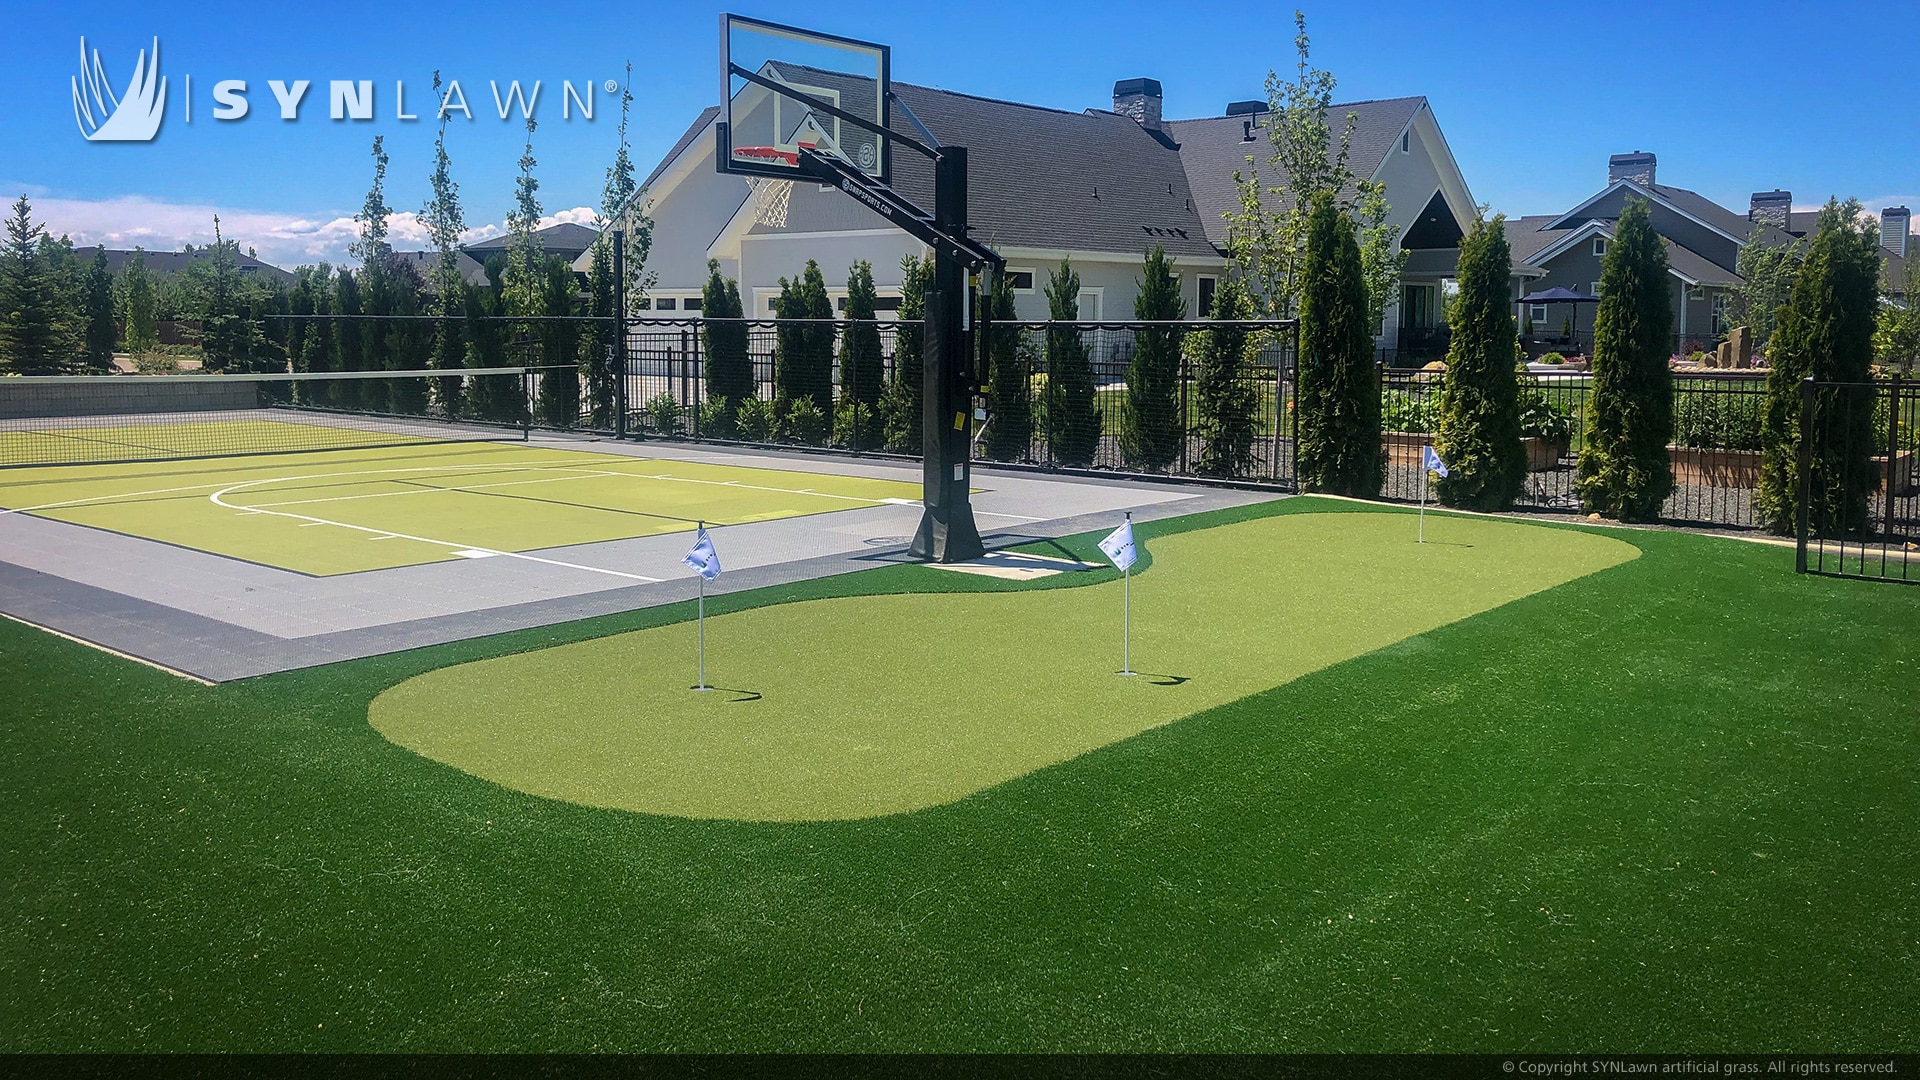 Idaho Homeowner Creates a Sports Complex for Family with Artificial Turf